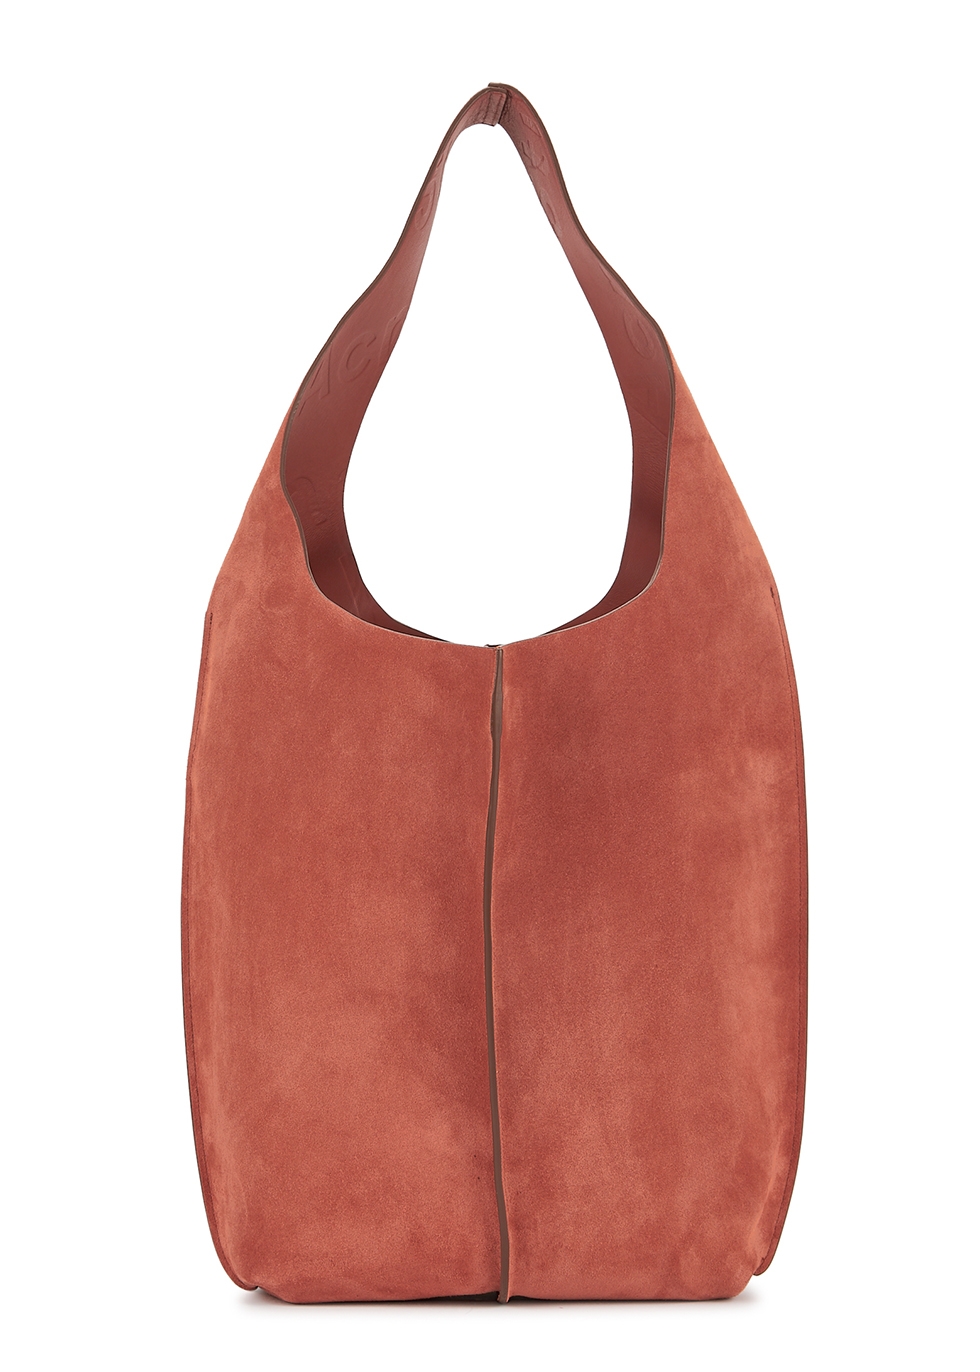 Rust suede tote